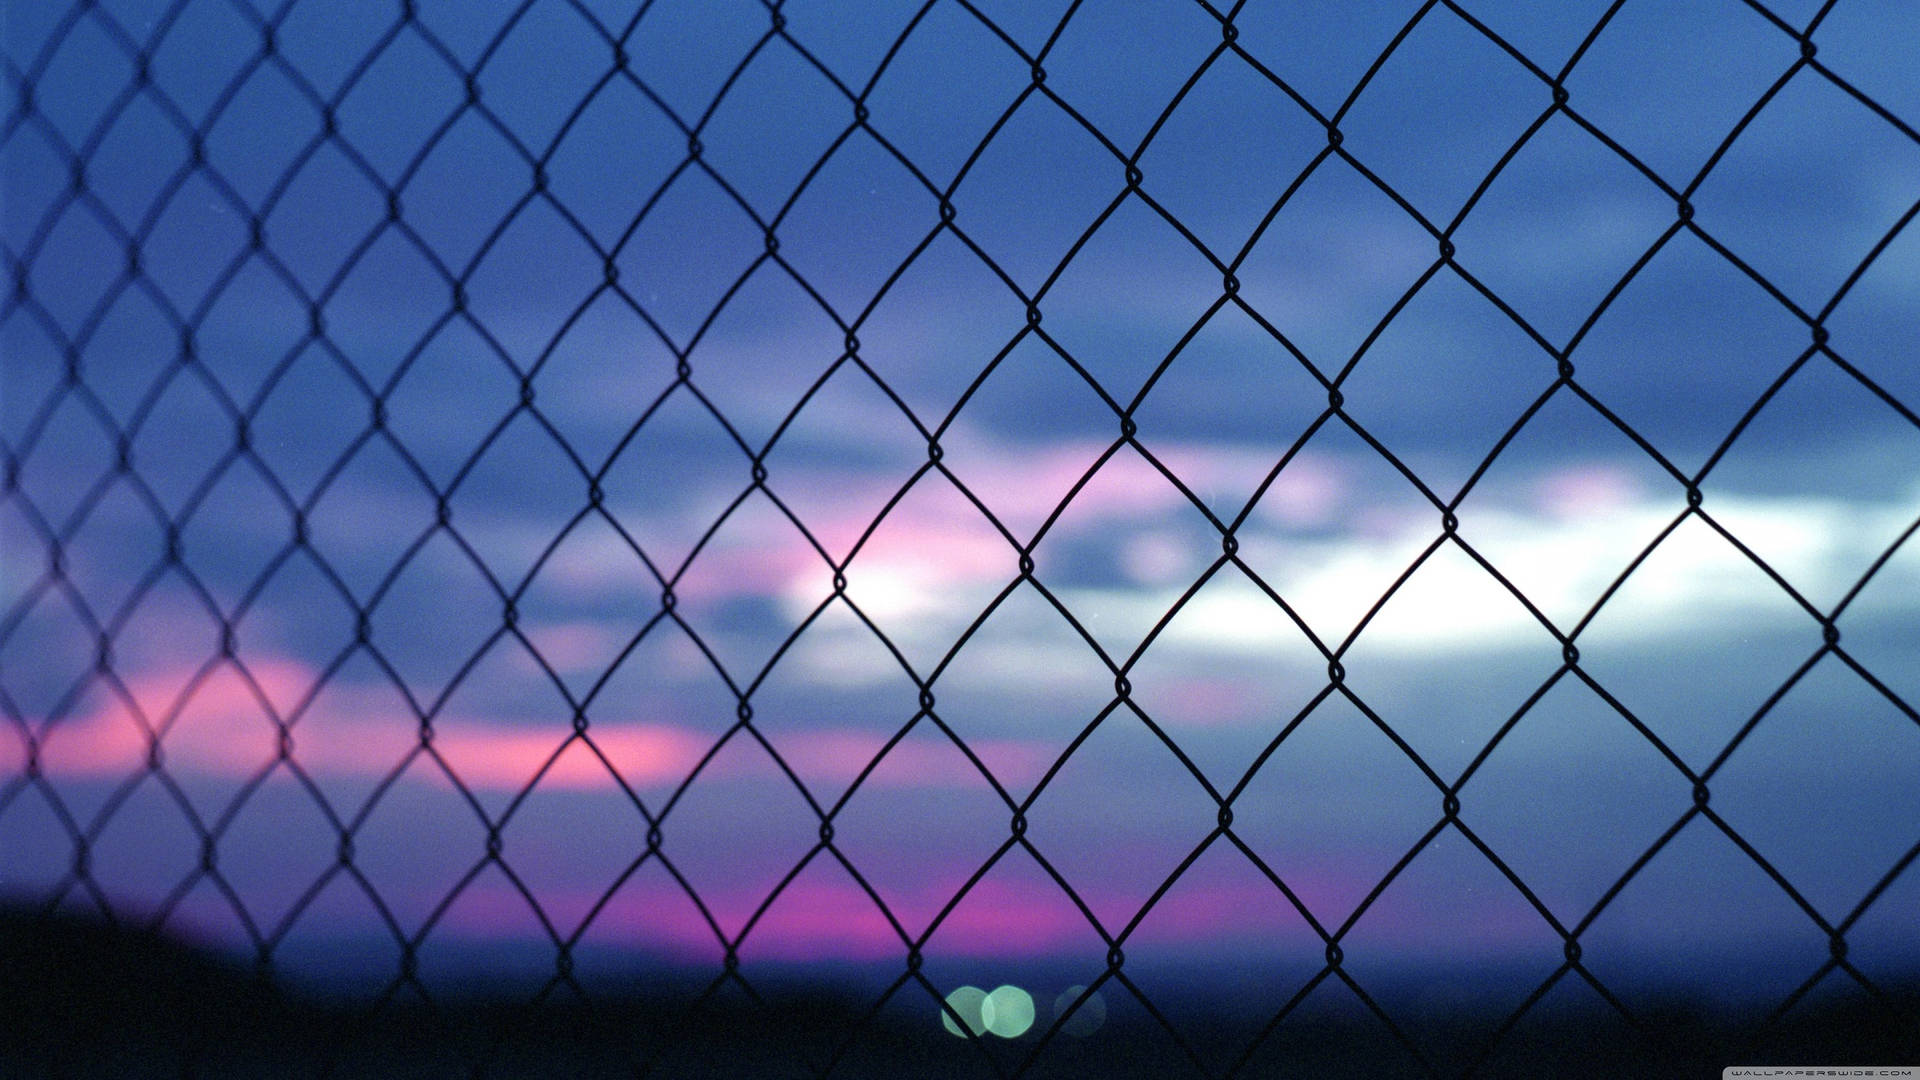 Aesthetic Tumblr Sky Behind Fence Wallpaper